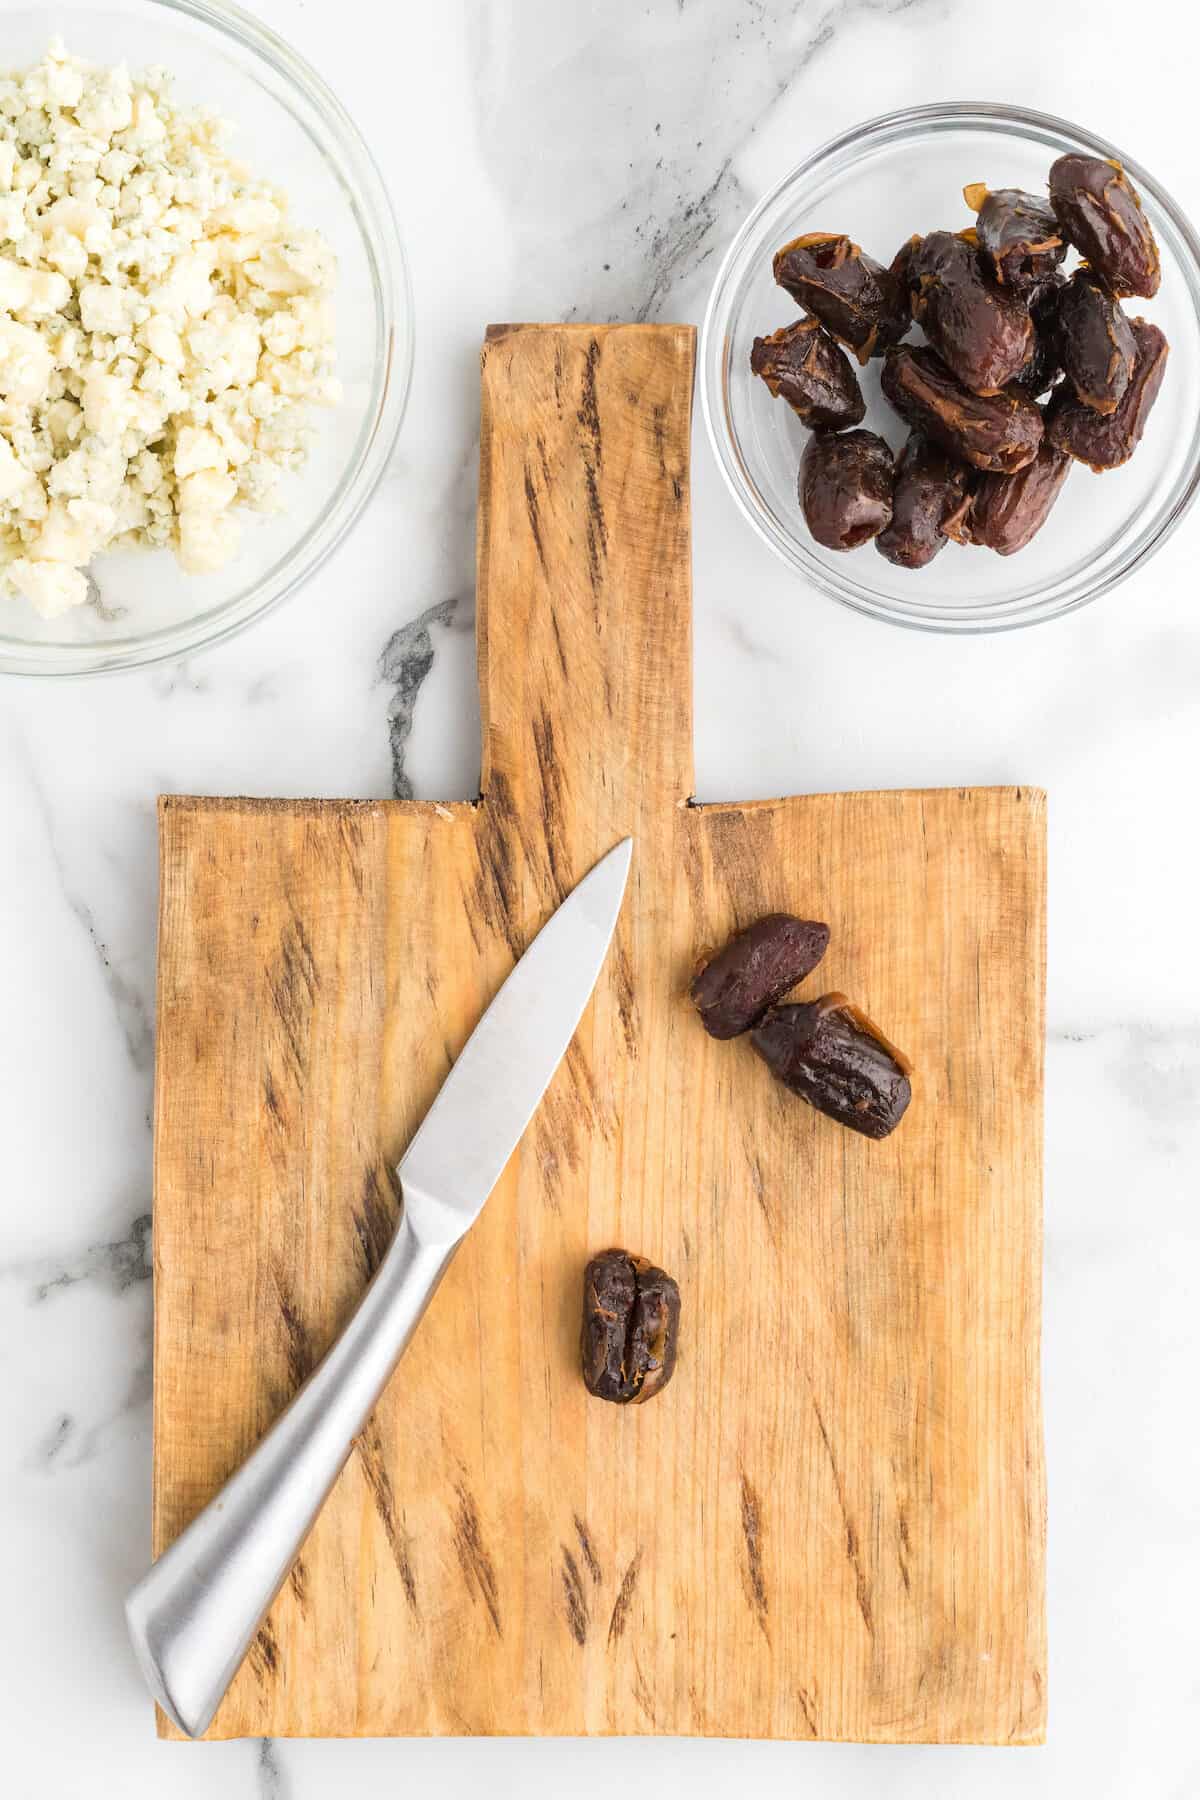 slicing the dates on a wooden cutting board.